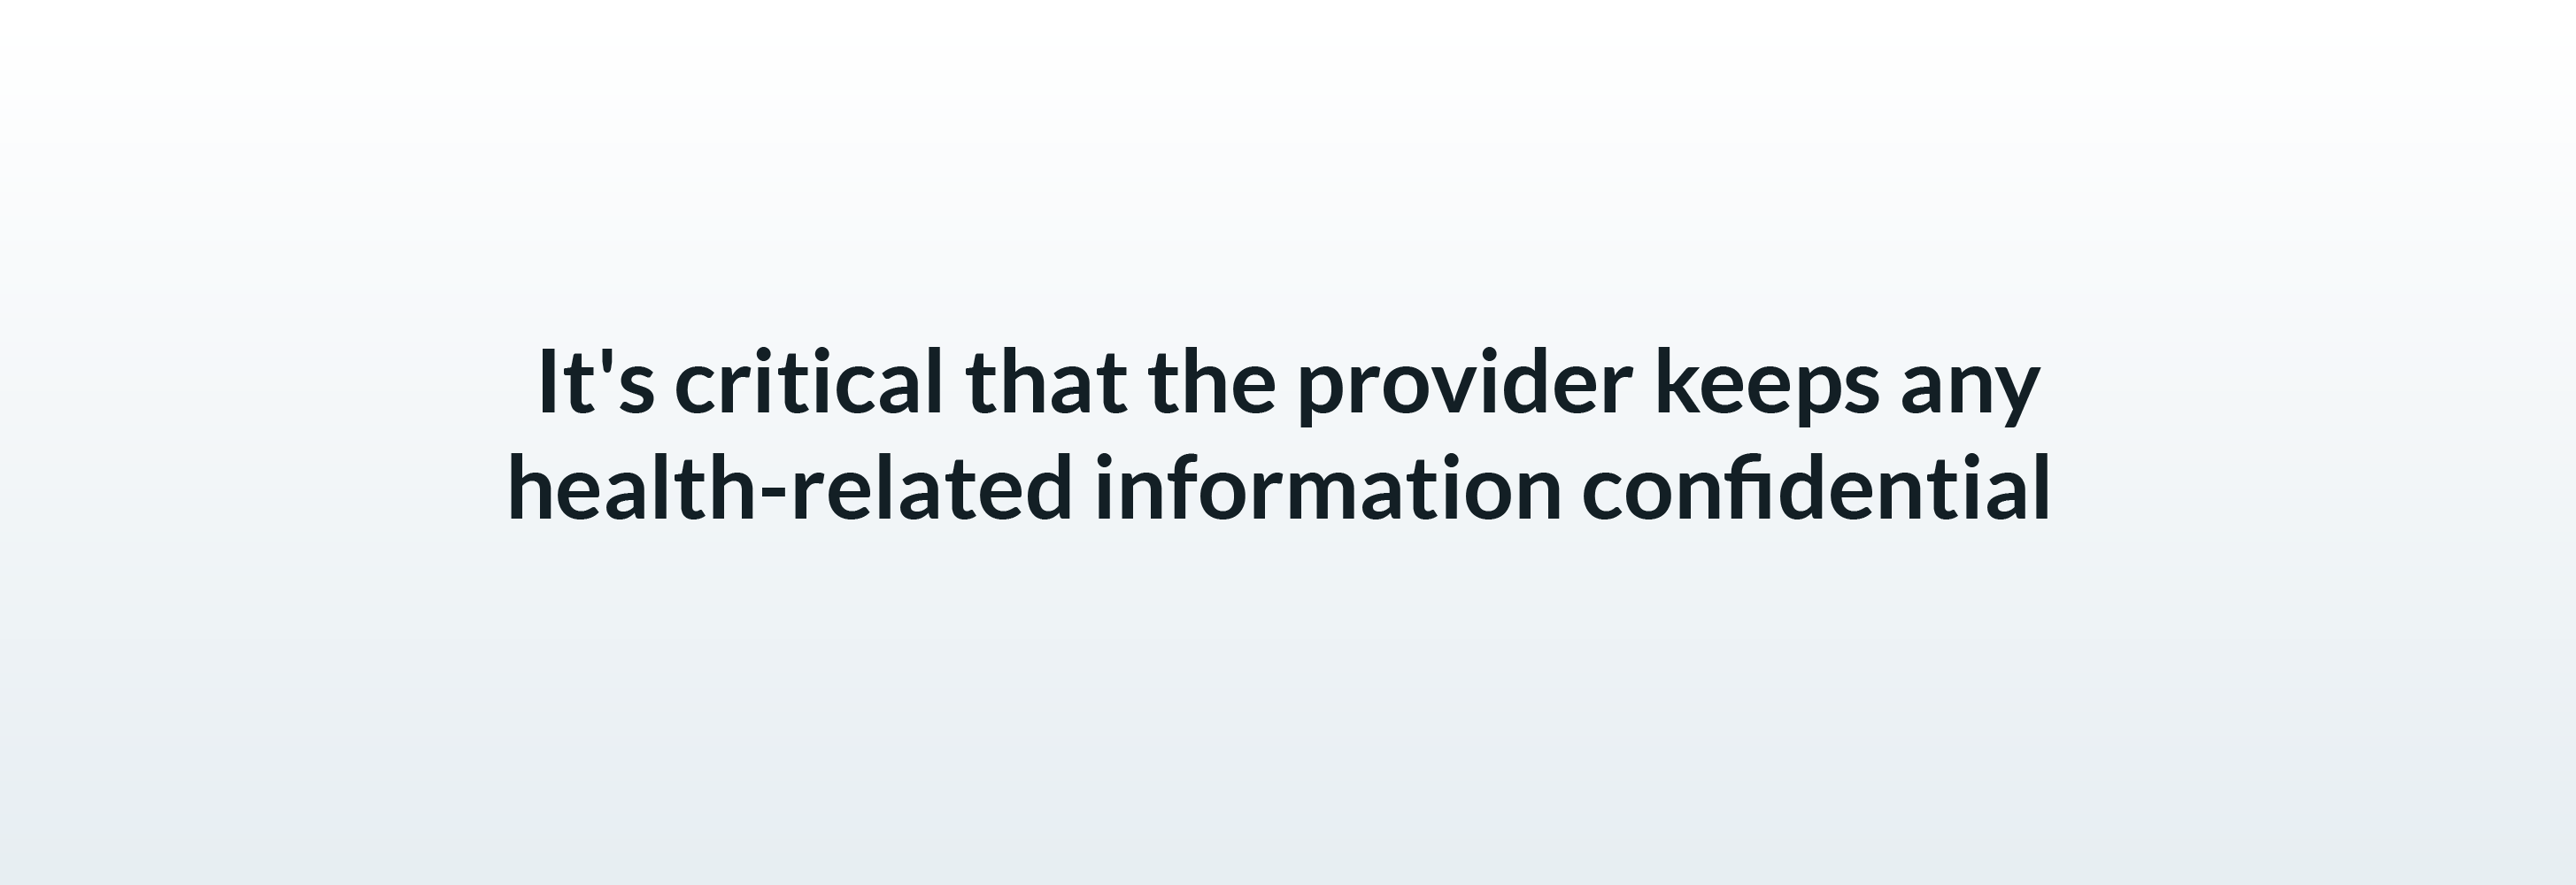 It's critical that the provider keeps any health-related information confidential